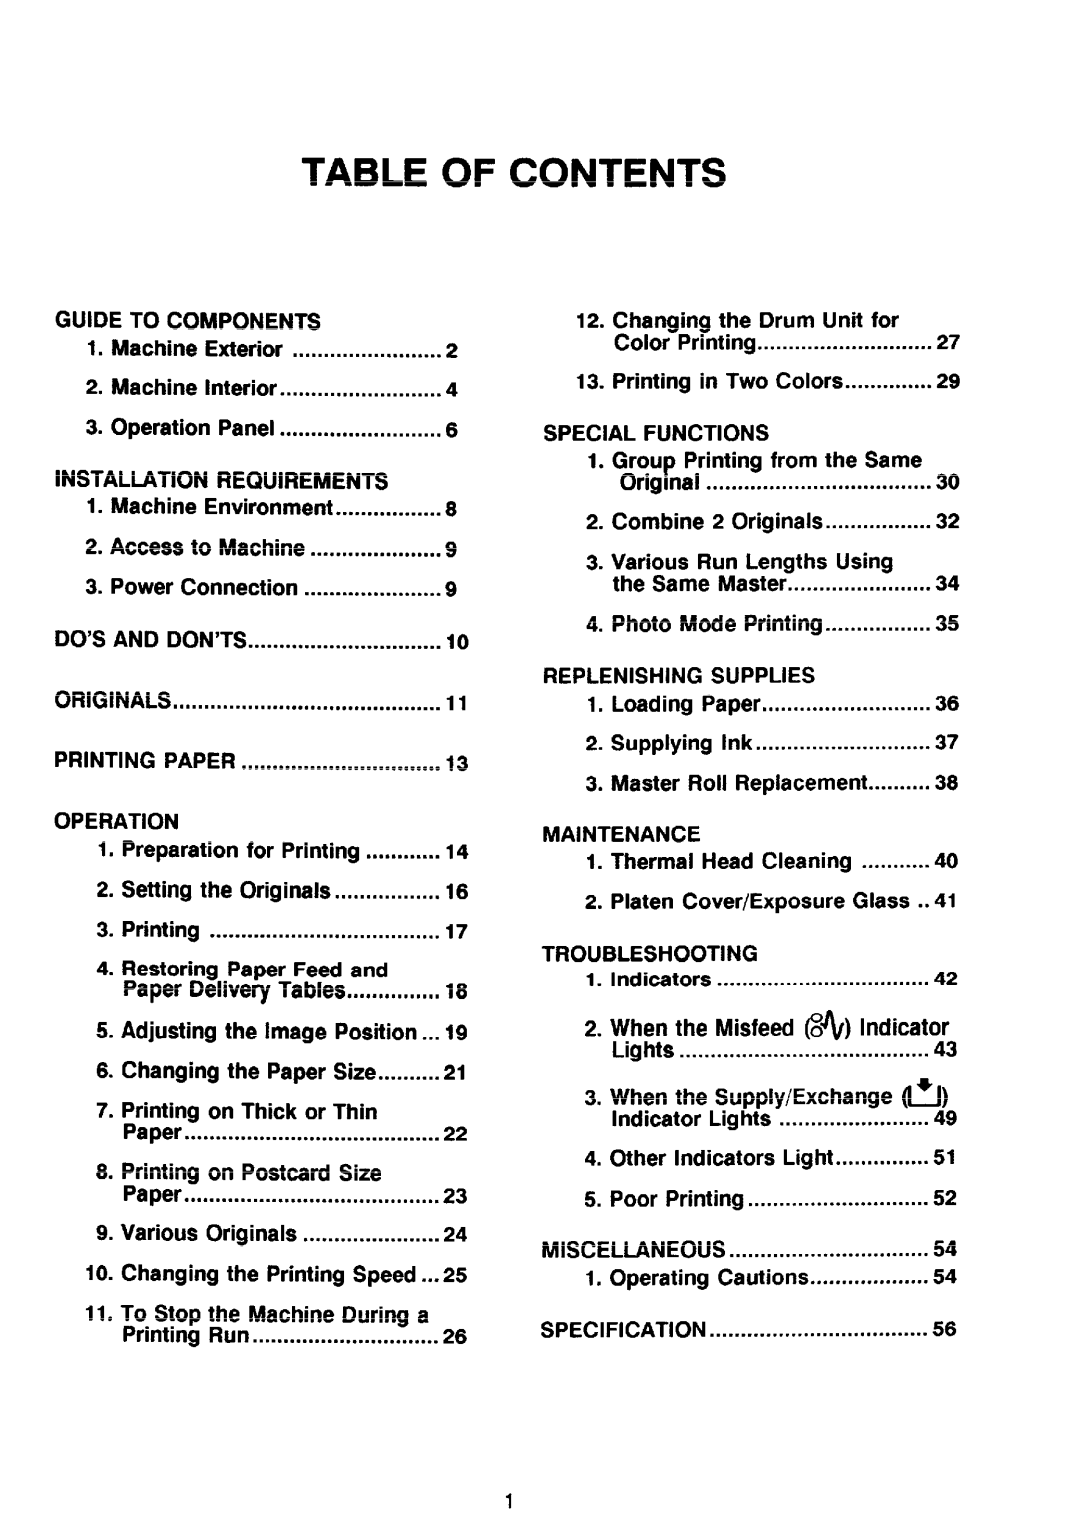 Ricoh PRIPORT VT2130 manual Table Of Contents, When the Misfeed 8%.-. Indicator 